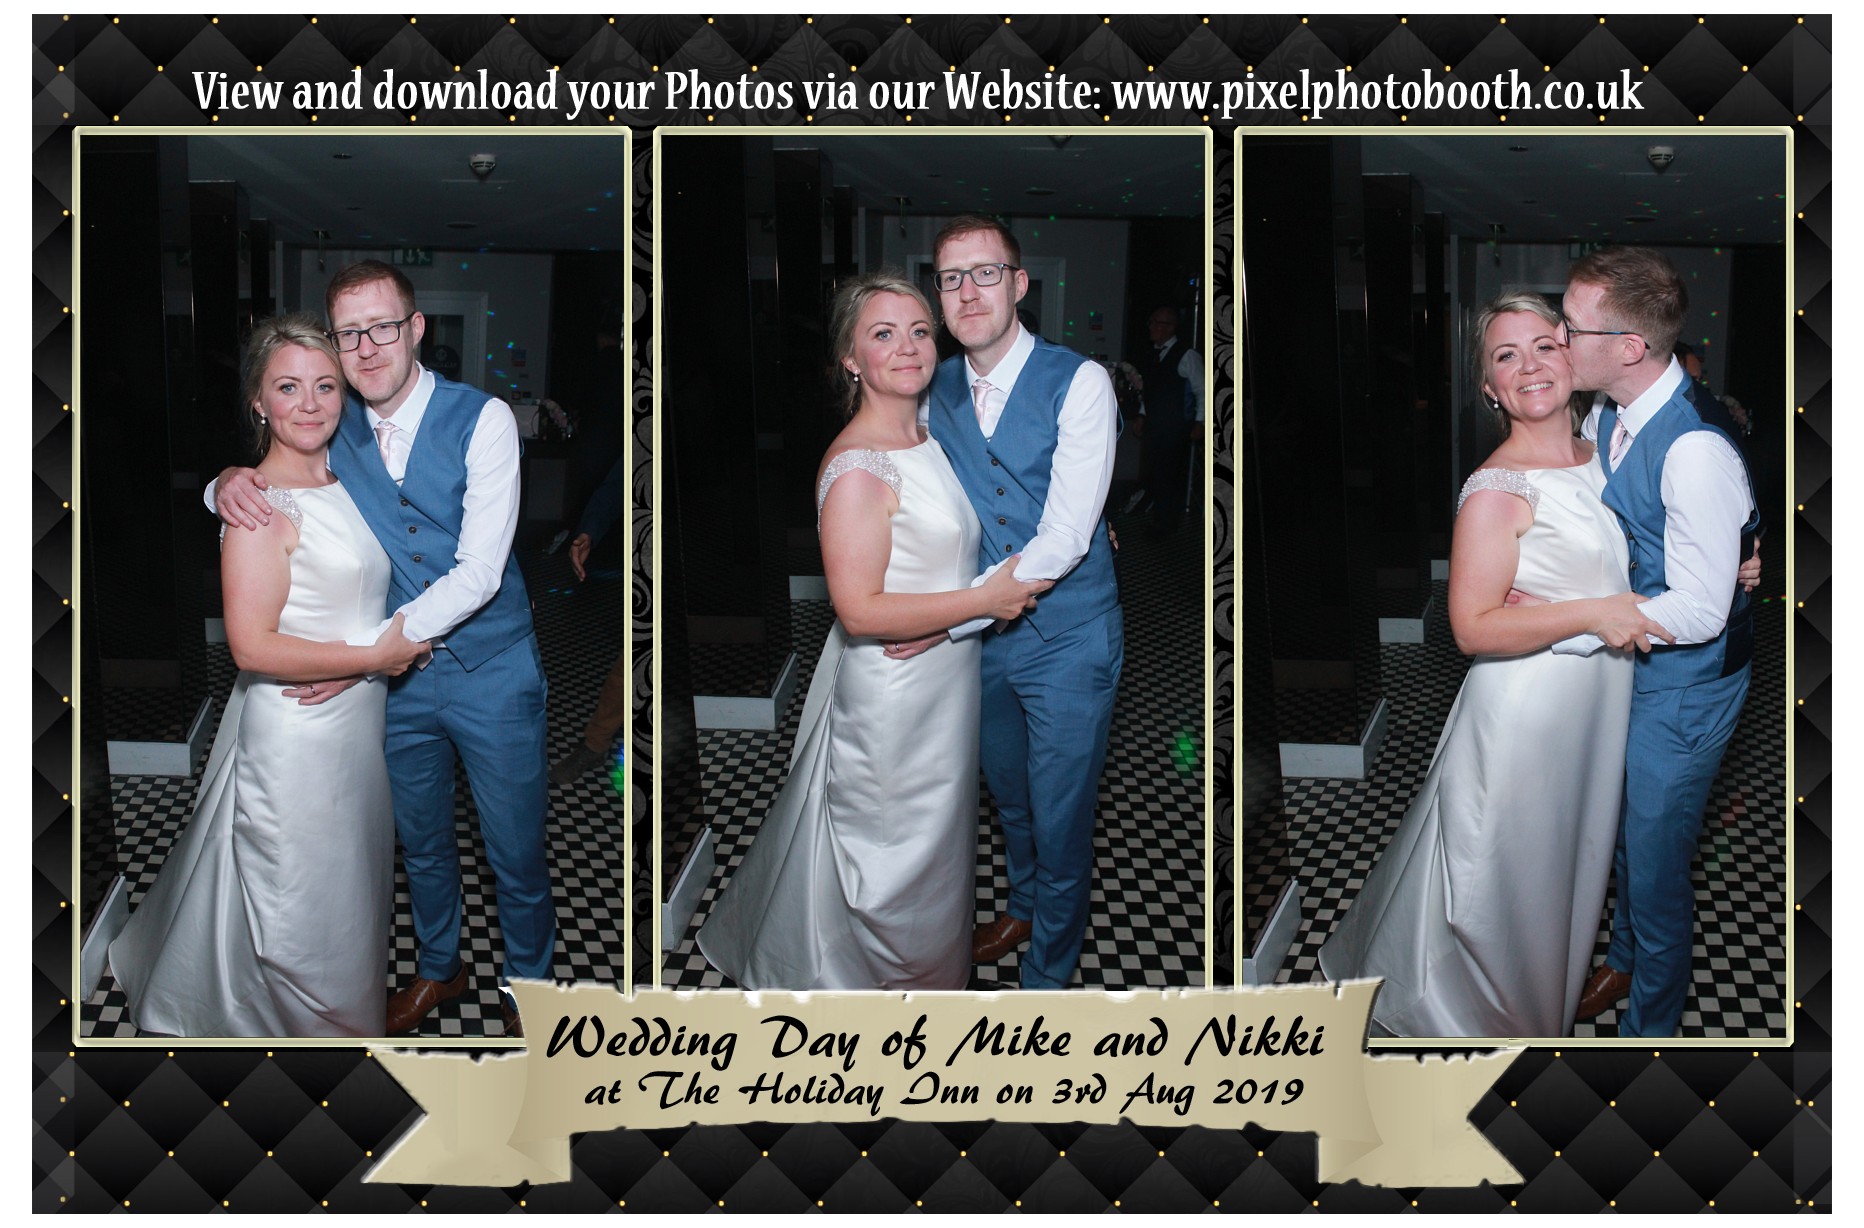 3rd aug 2019: Mike and Nikki's Wedding at The Holiday Inn